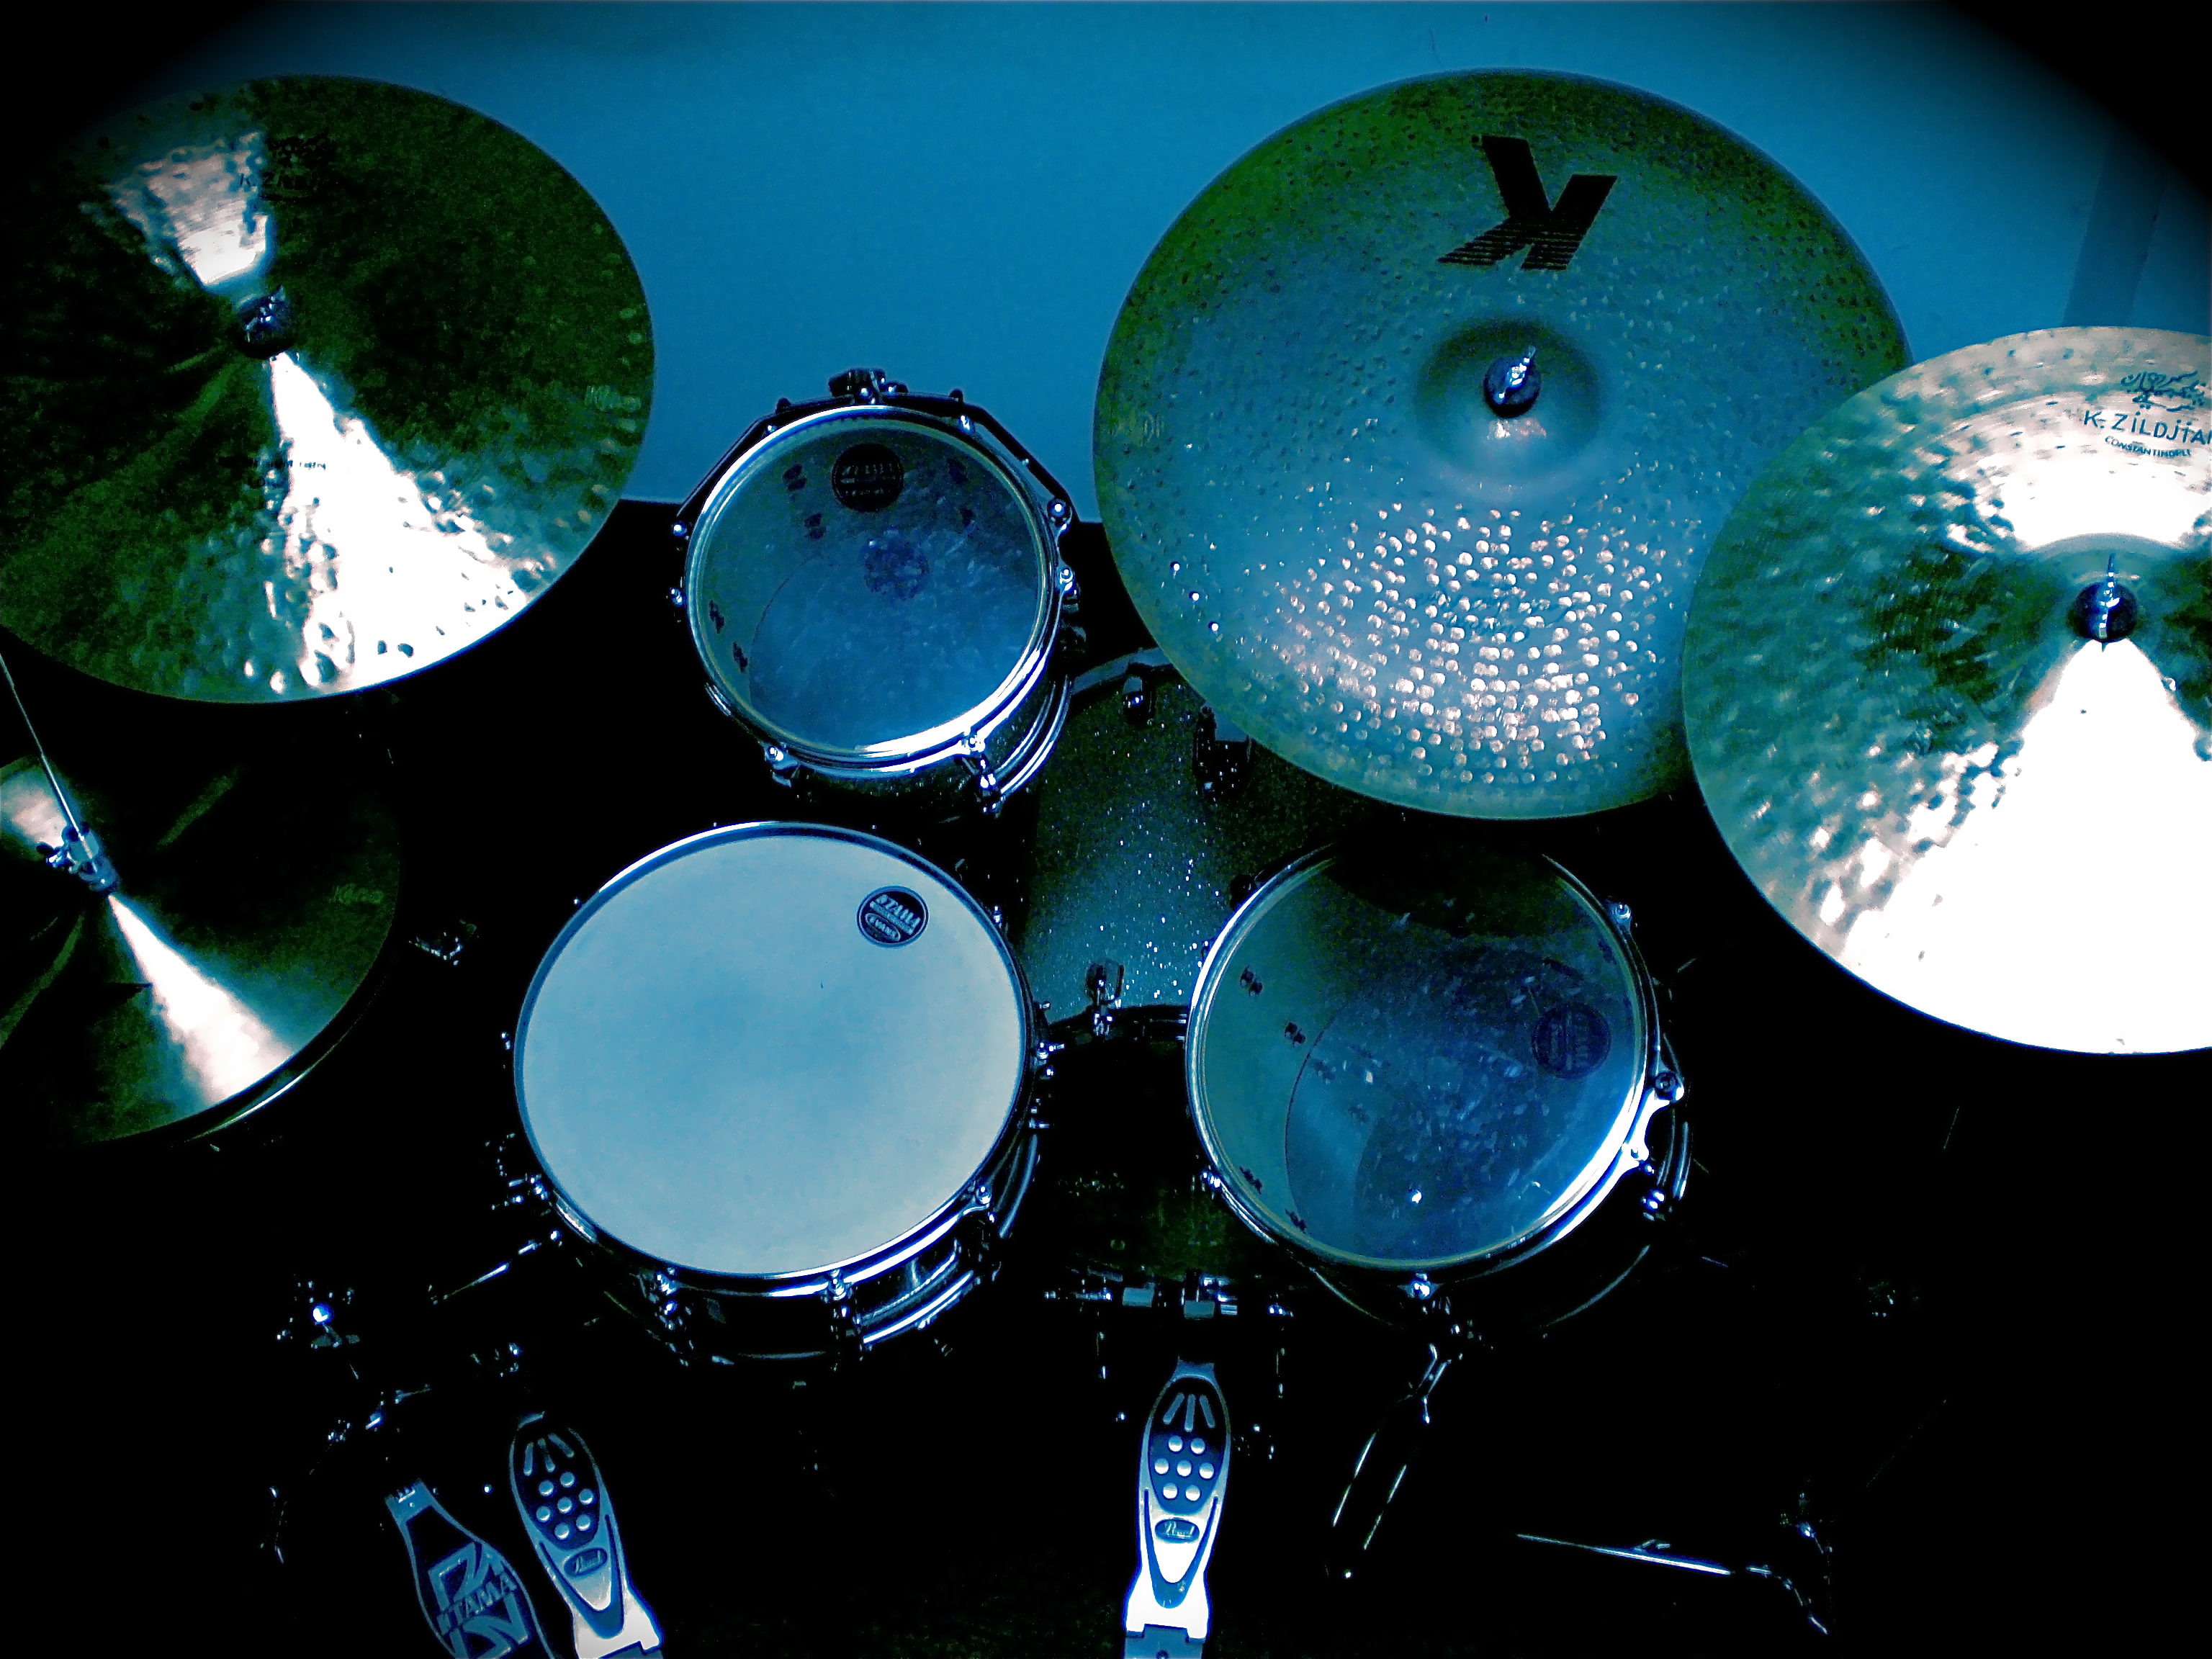 Are Ing Drums HD Wallpaper Color Palette Tags Category Music